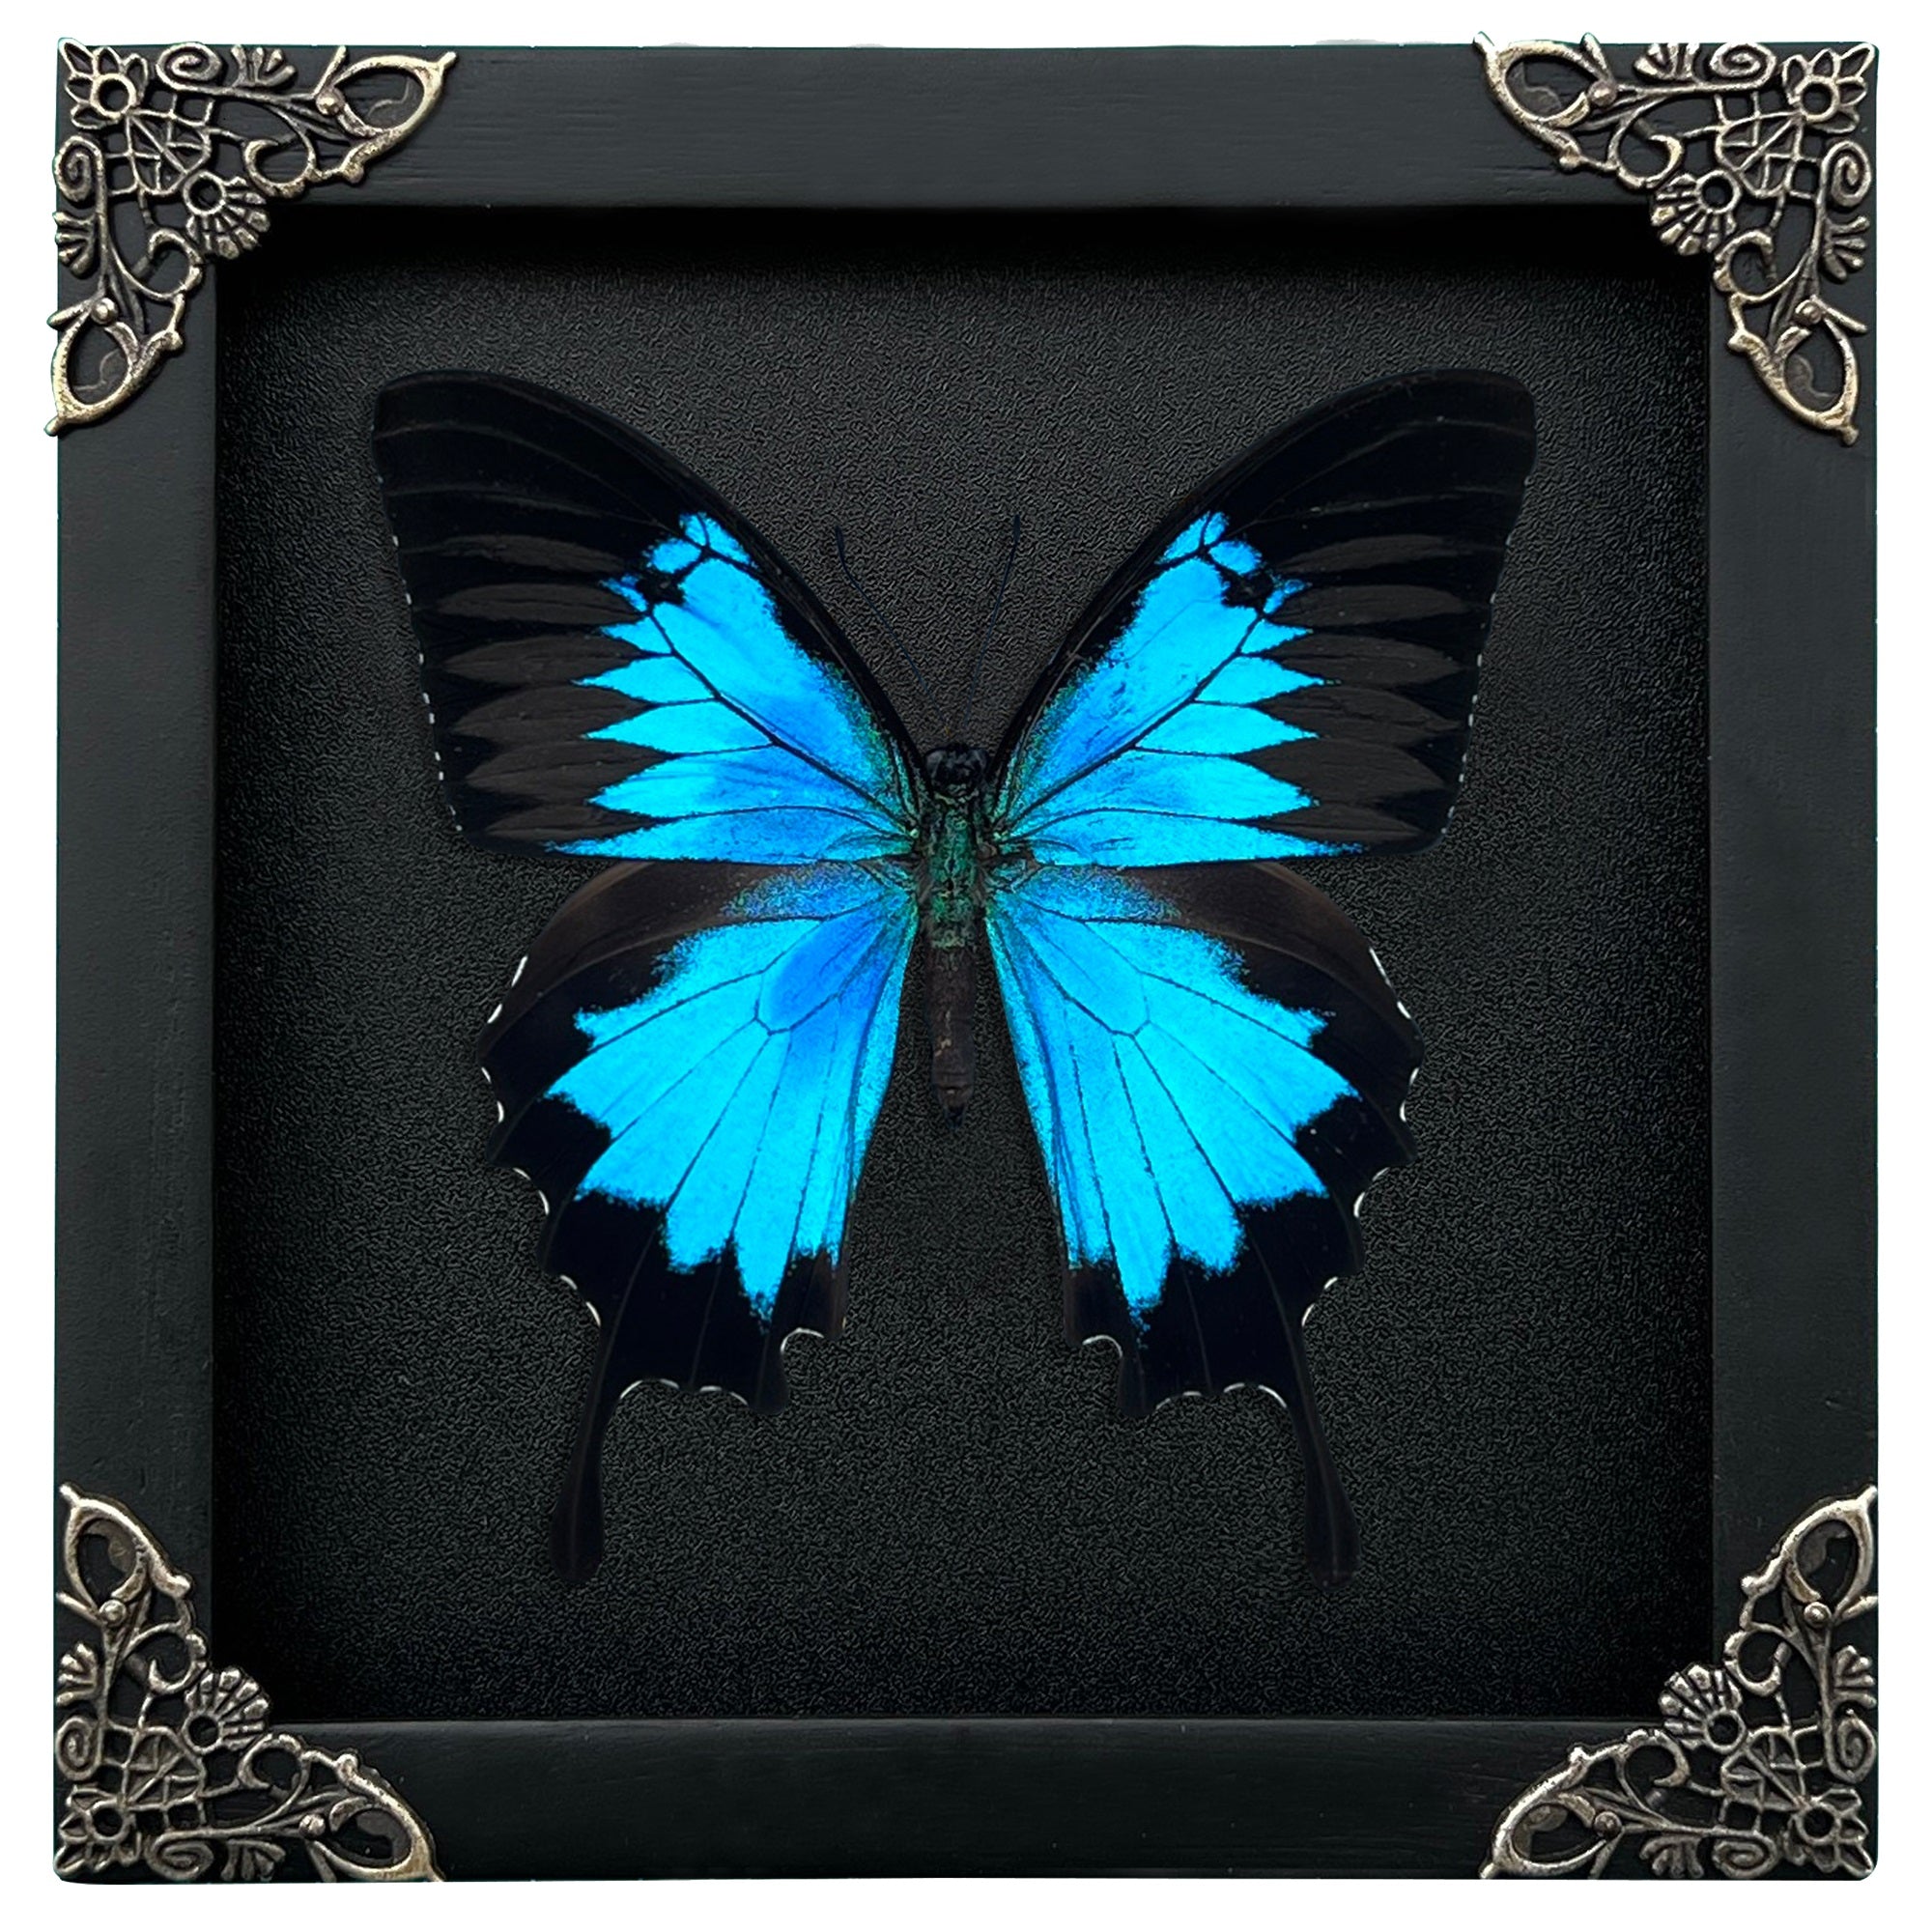 Blue Swallowtail Butterfly Real Framed Wooden Shadow Box Dried Insect Taxidermy Specimen K16-28-DE